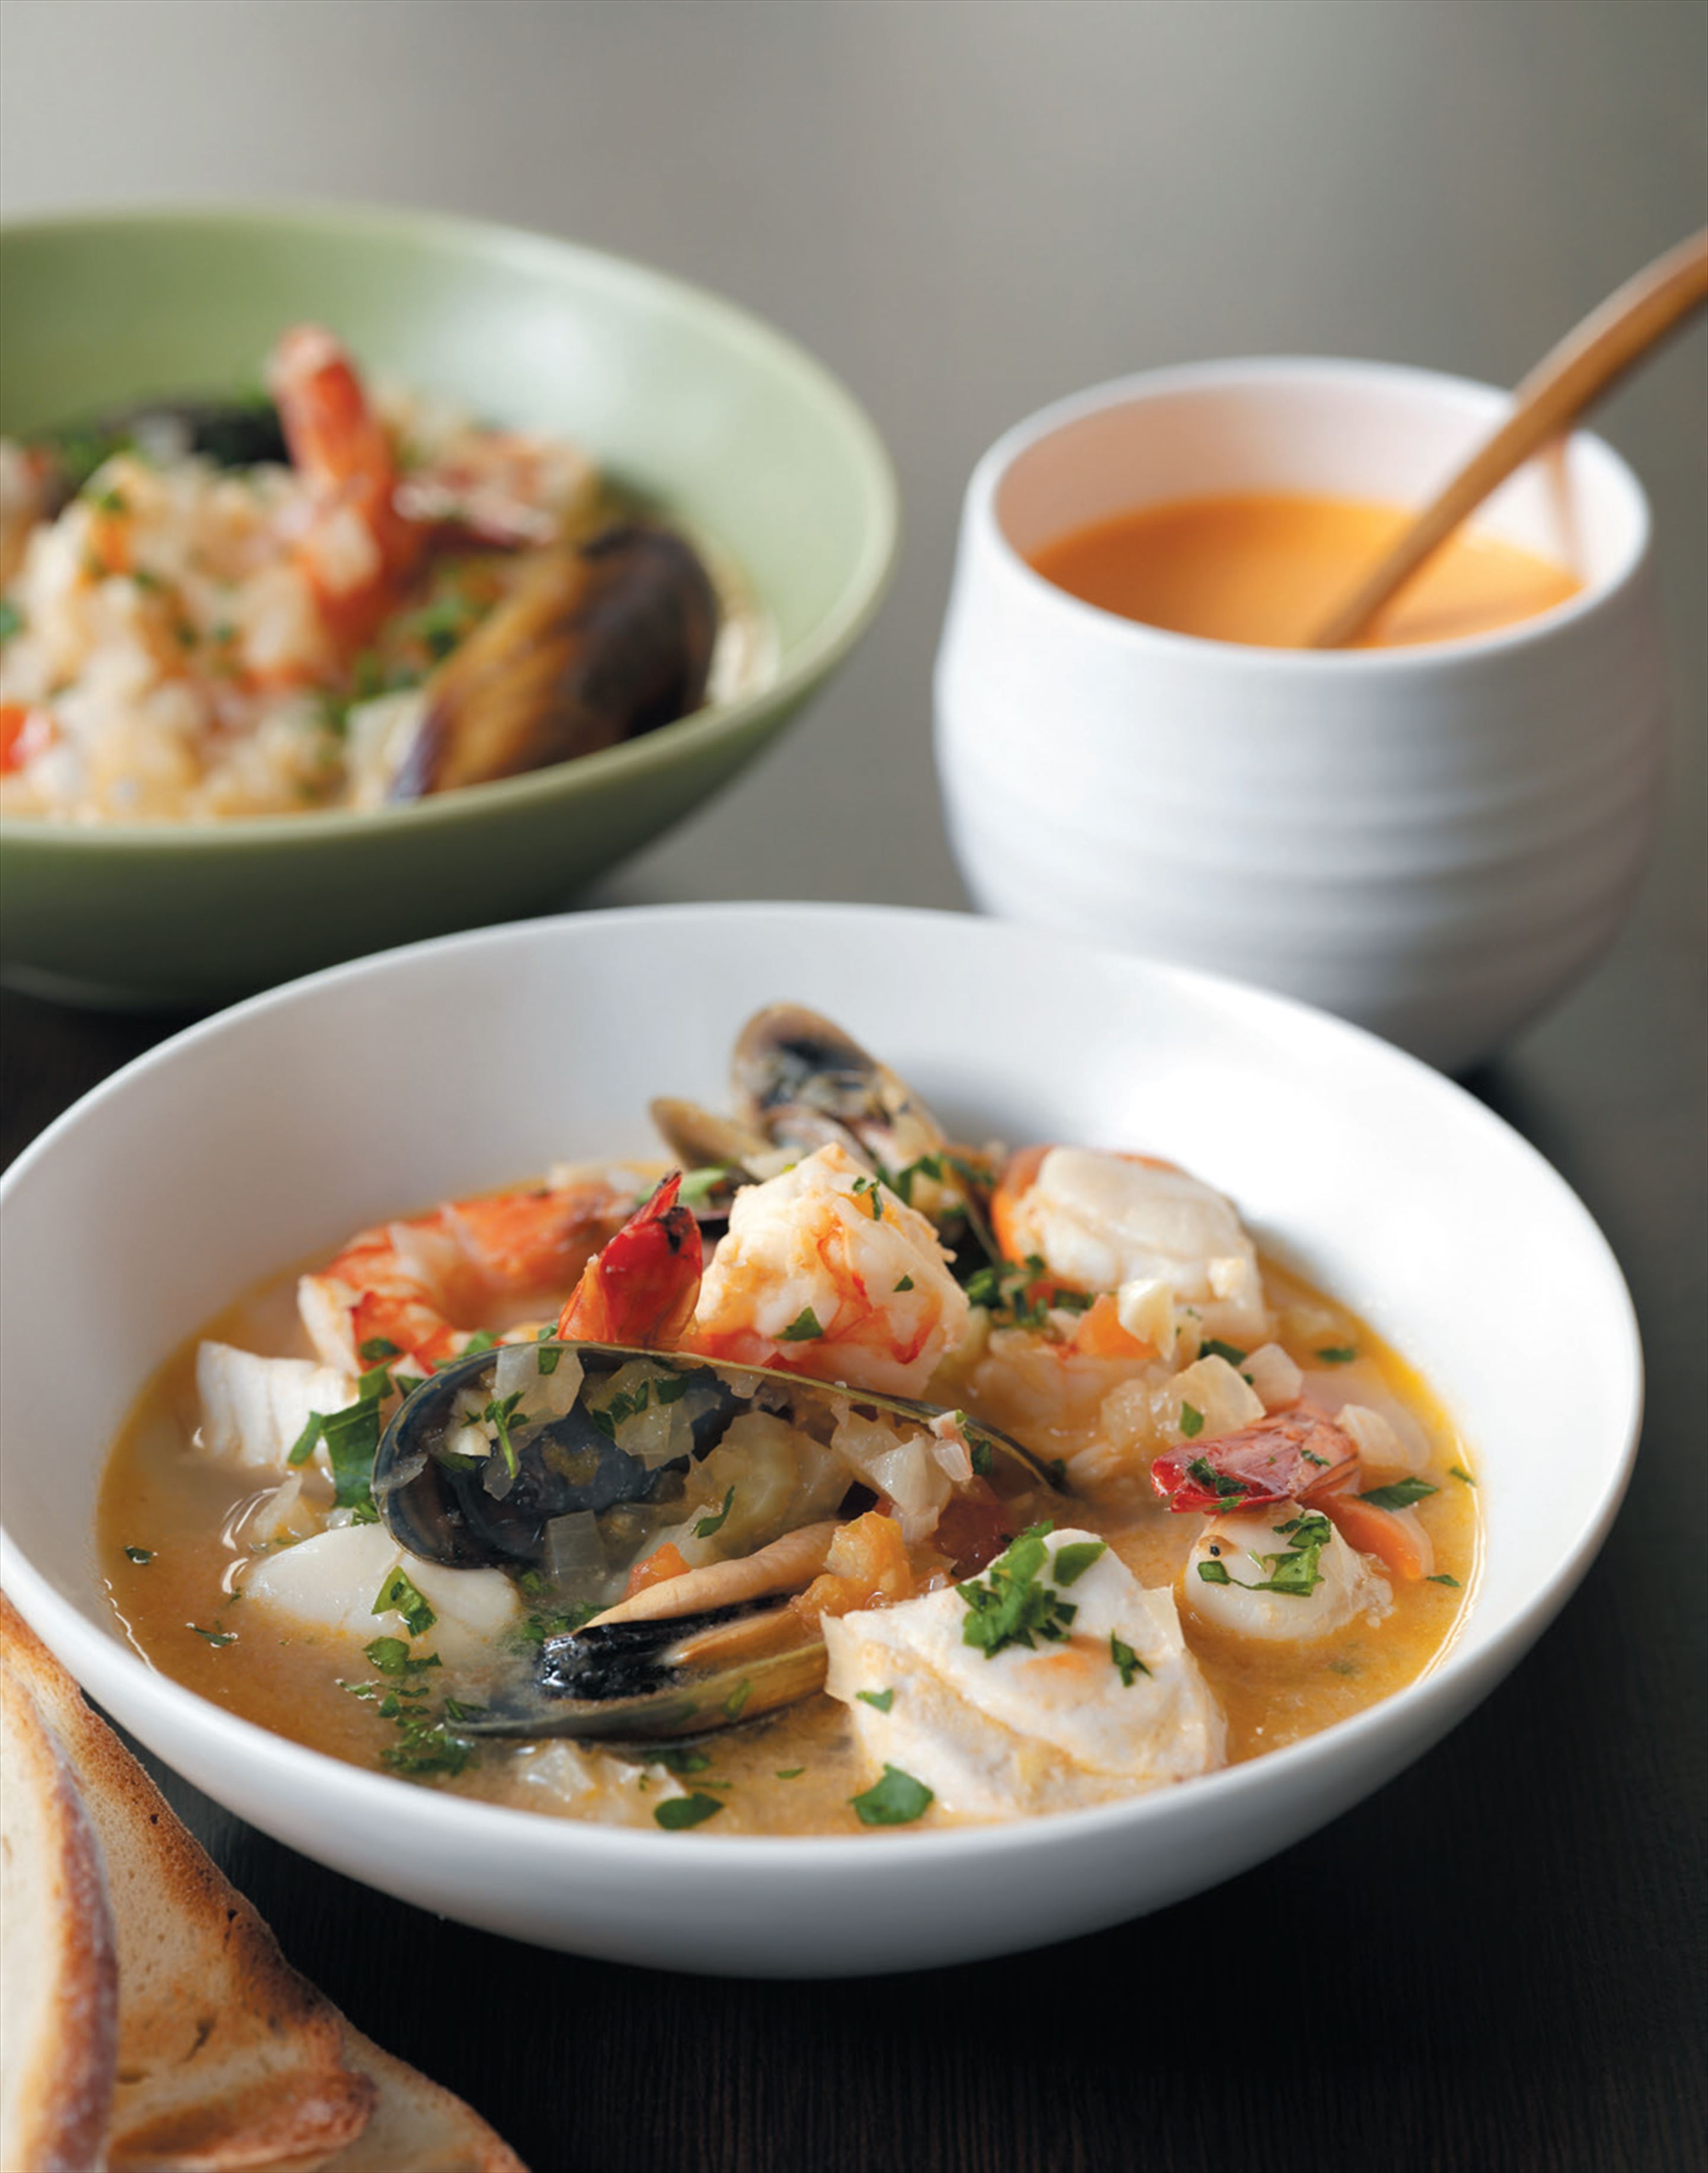 Fish stew with rouille sauce